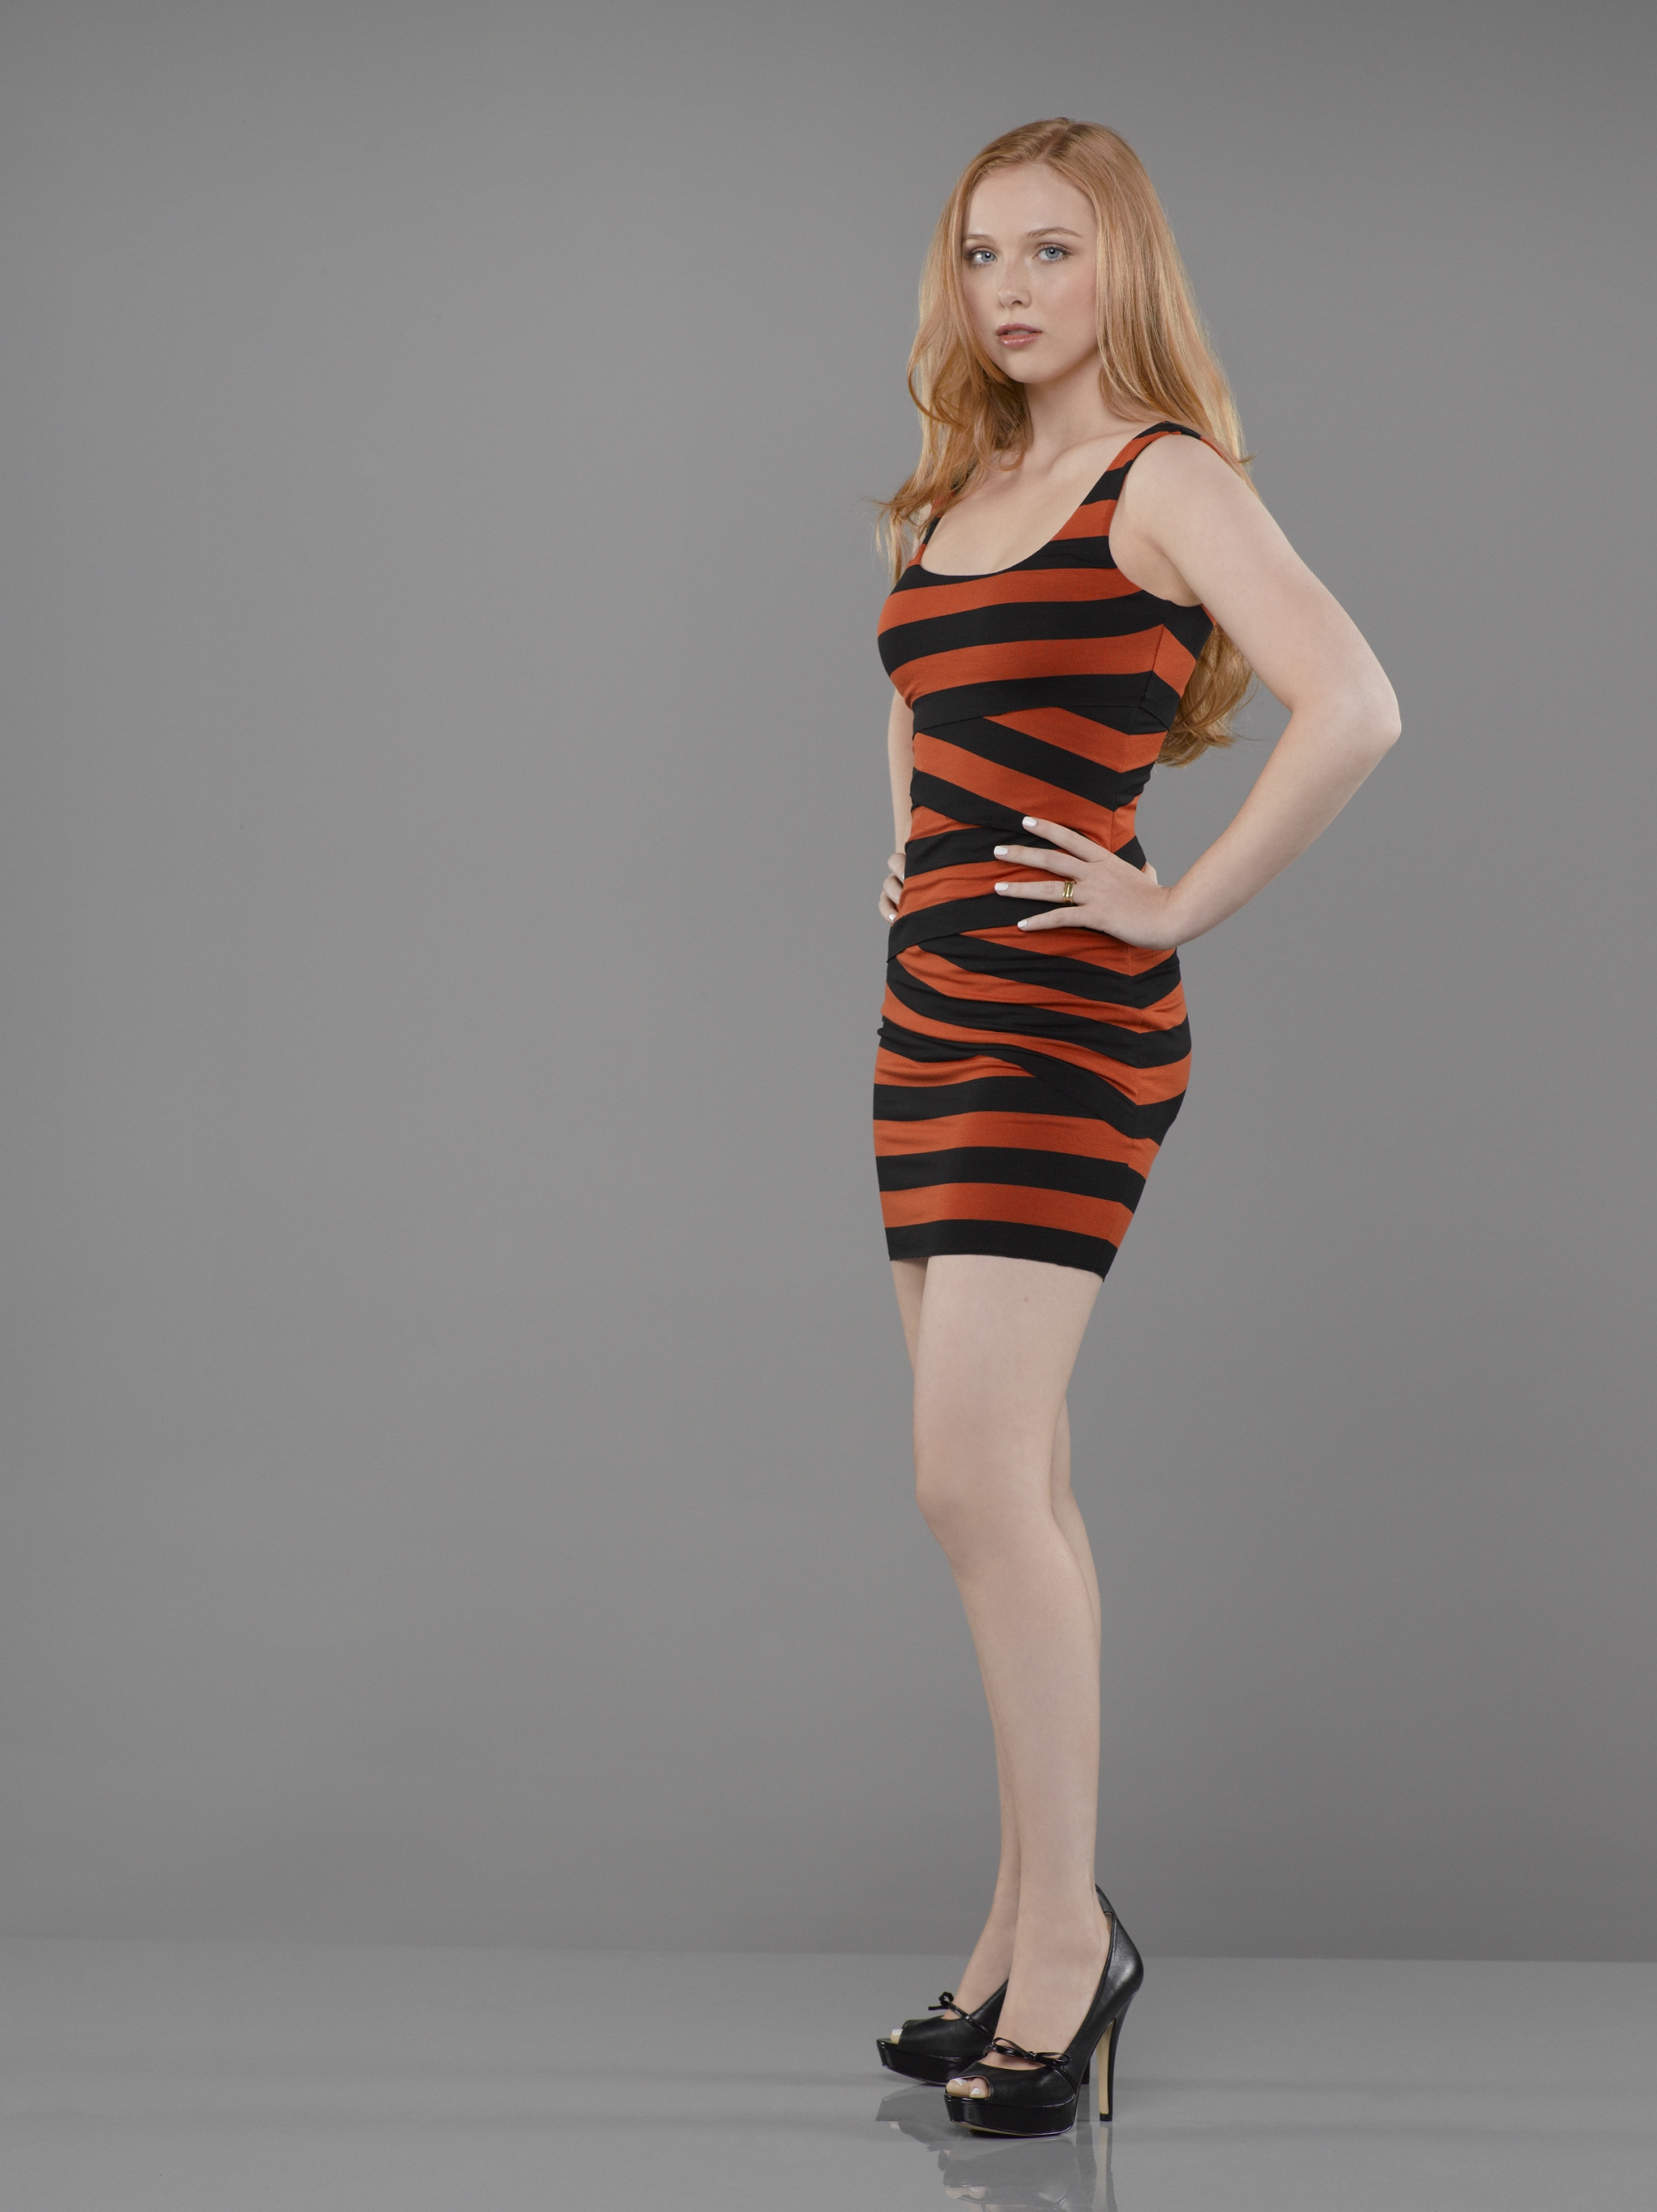 Molly Quinn Pictures. Hotness Rating = 8.98/10